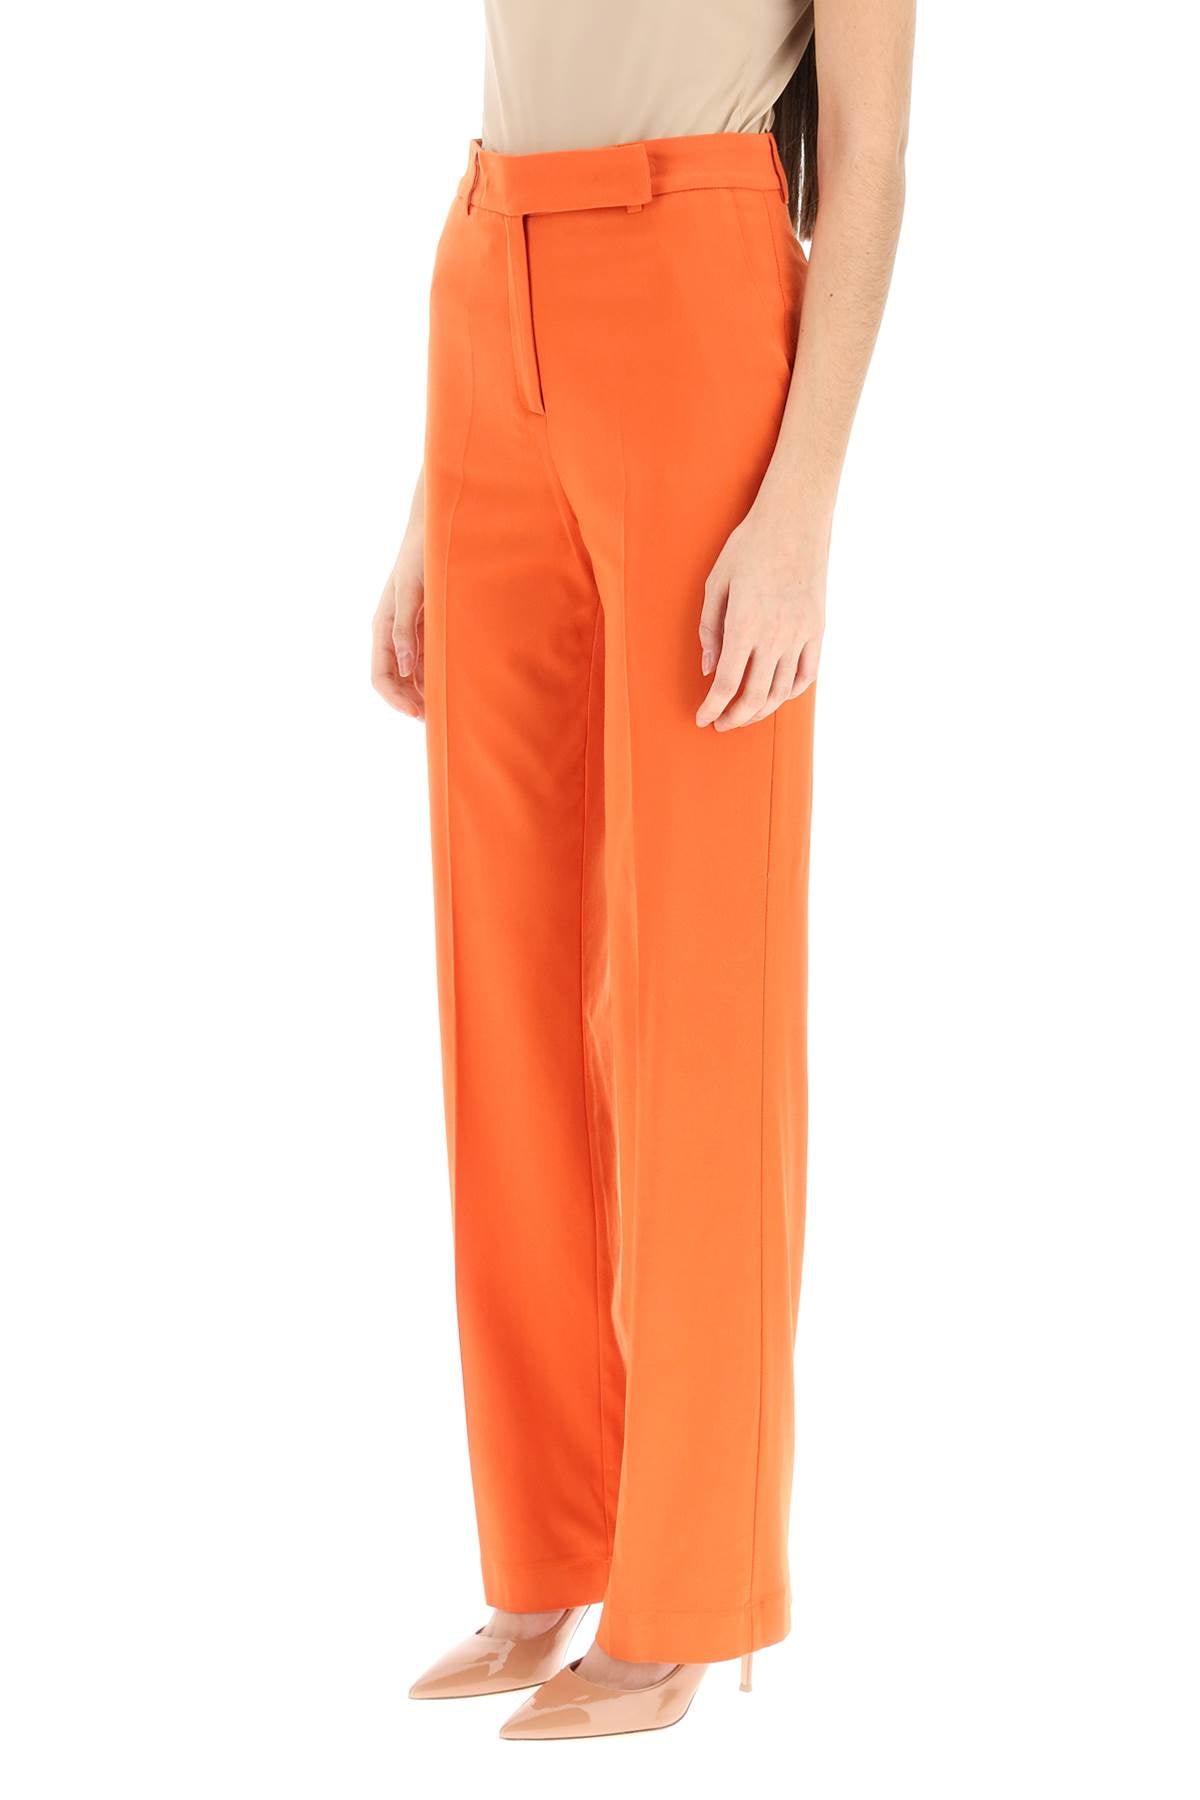 Hebe studio 'lover' canvas trousers-3